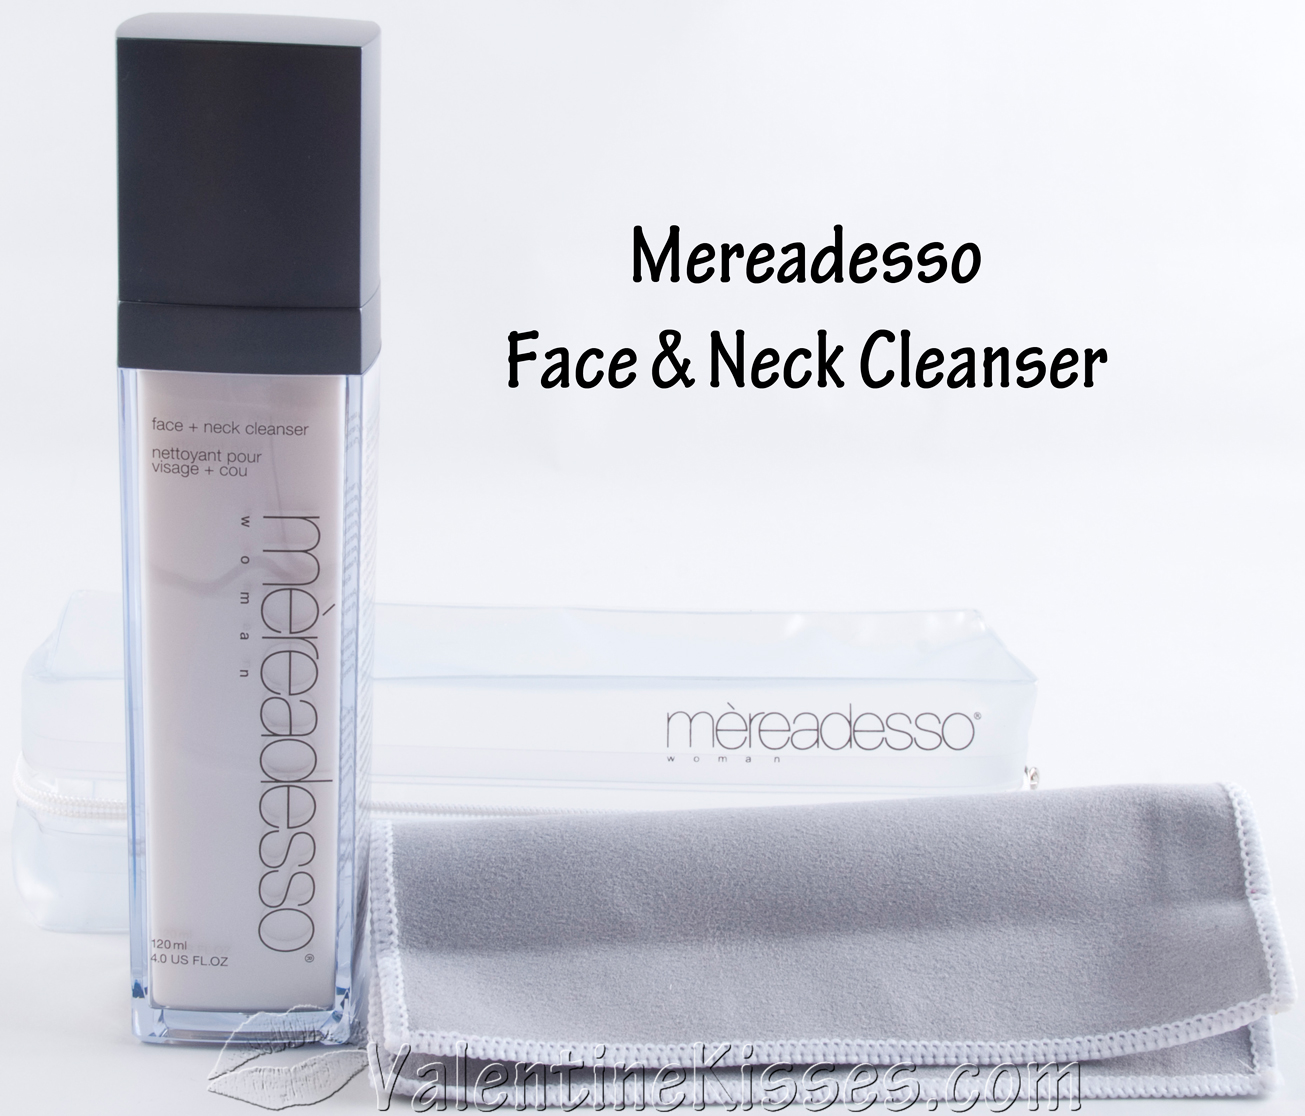 Valentine Kisses: Mereadesso Face & Neck Cleanser, Face & Neck Toning Gel,  Beautiful Body Balm - pics, swatches, review